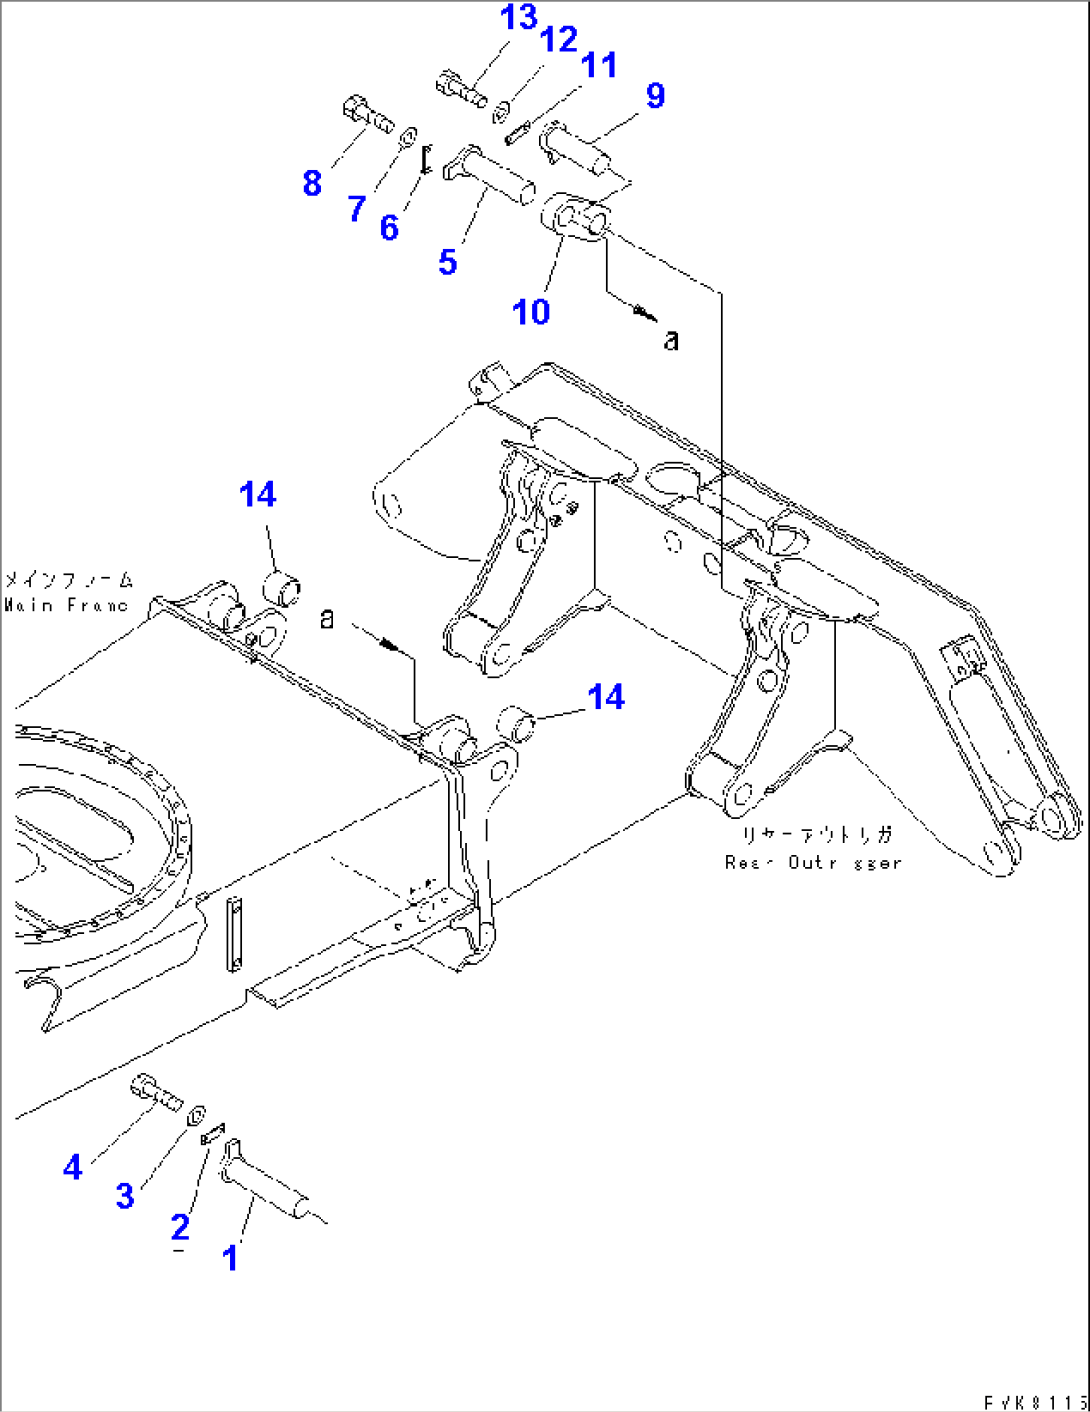 MOUNT PIN (FOR REAR OUTRIGGER OR FOUR OUTRIGGER)